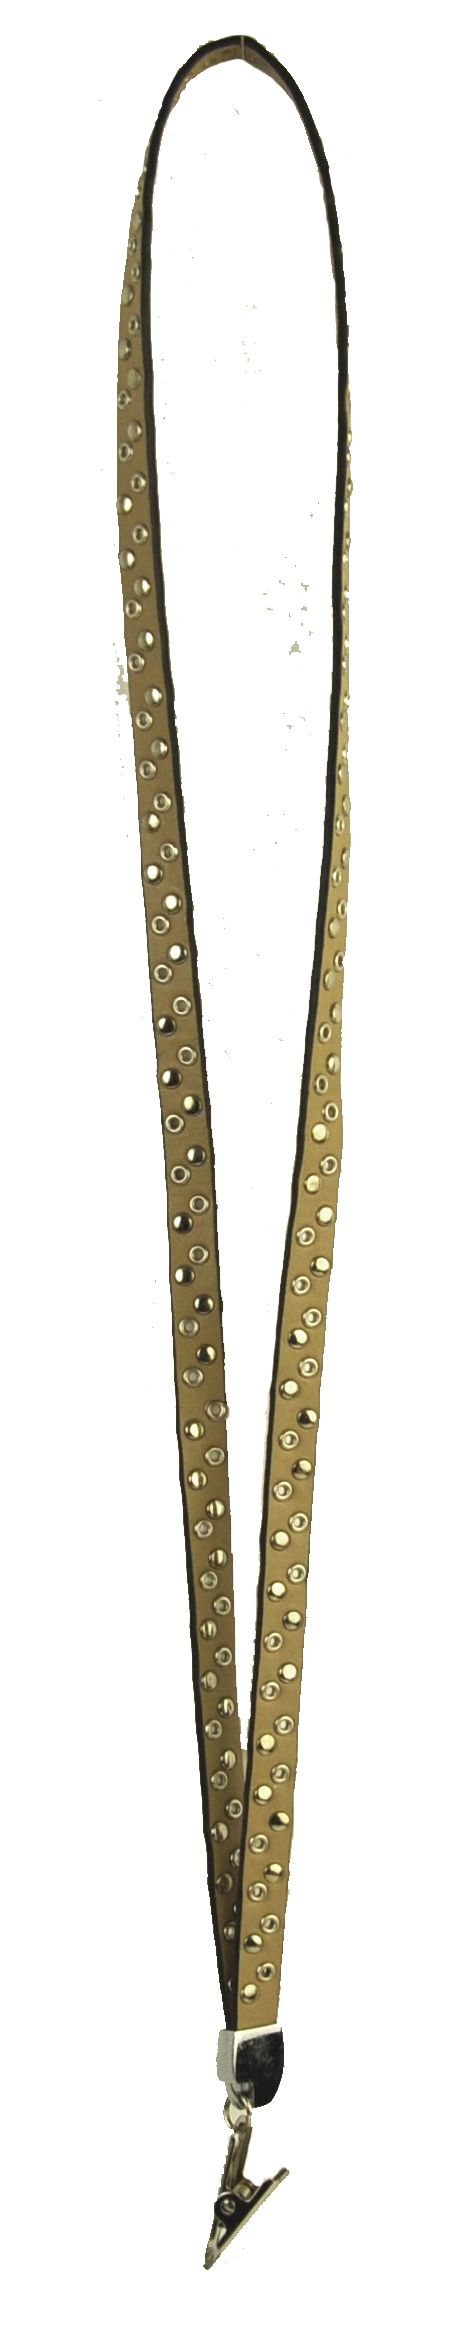 Studded Leather Lanyard BLN-801